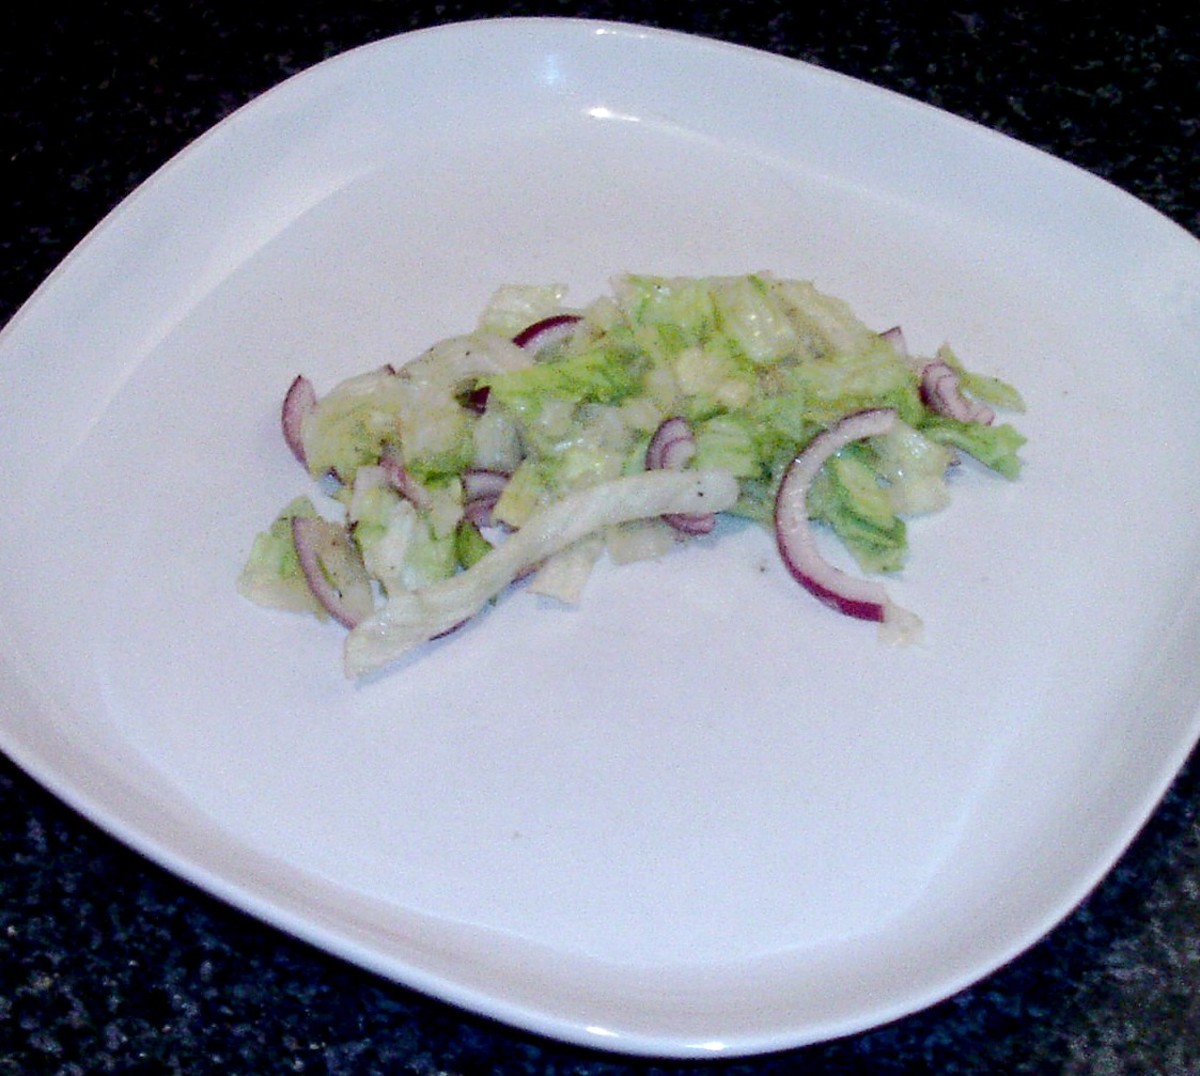 Lettuce and onion sandwich bed is plated